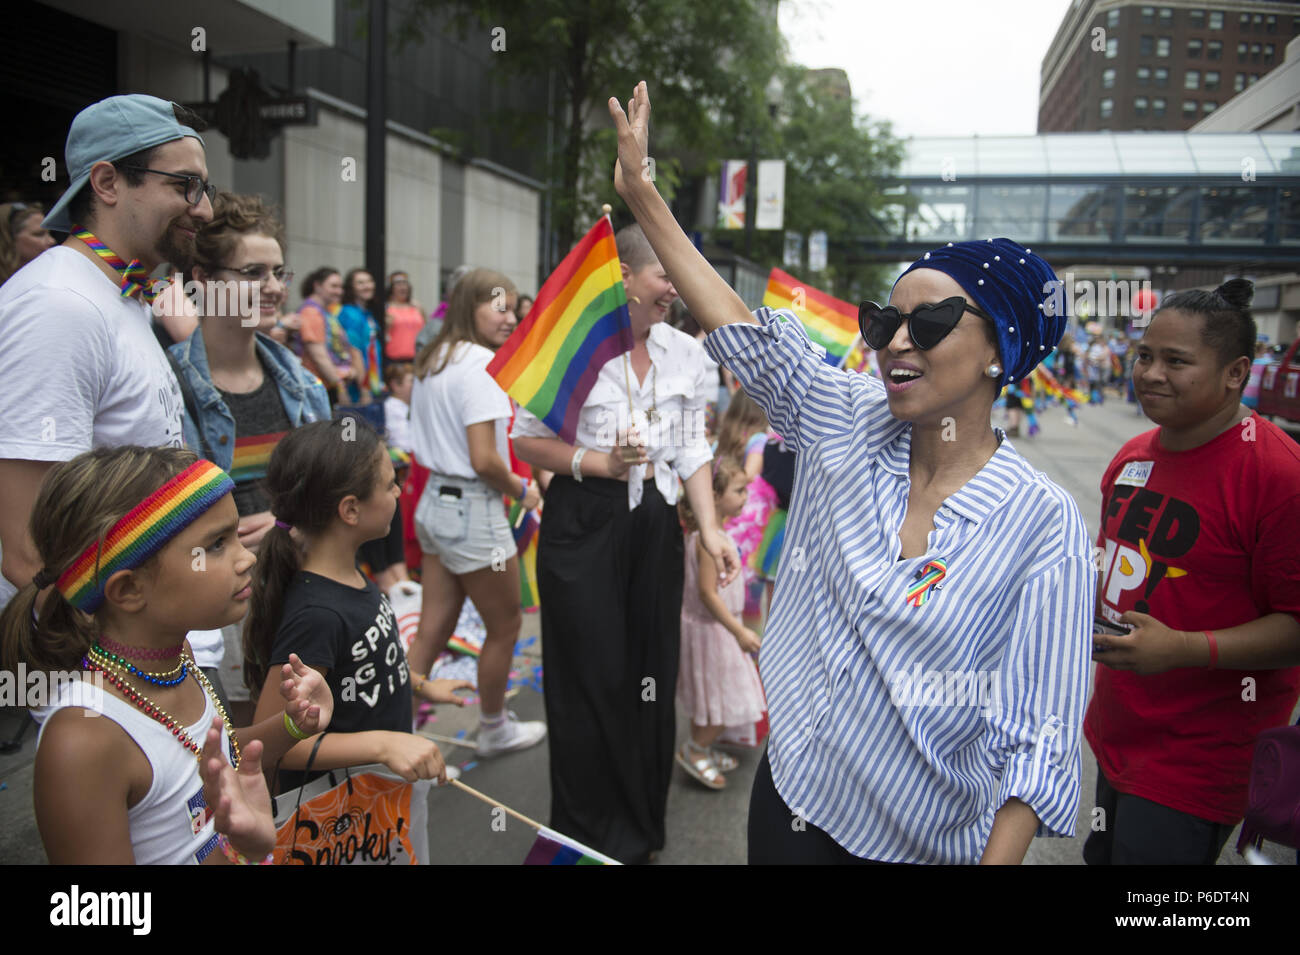 minneapolis-minnesota-usa-24th-june-2018-state-rep-ilhan-omar-the-dfl-endorsed-candidate-for-the-us-5th-congressional-district-campaigns-at-the-pride-parade-in-minneapolis-mn-credit-craig-lassigzuma-wirealamy-live-news-P6DT4N.jpg